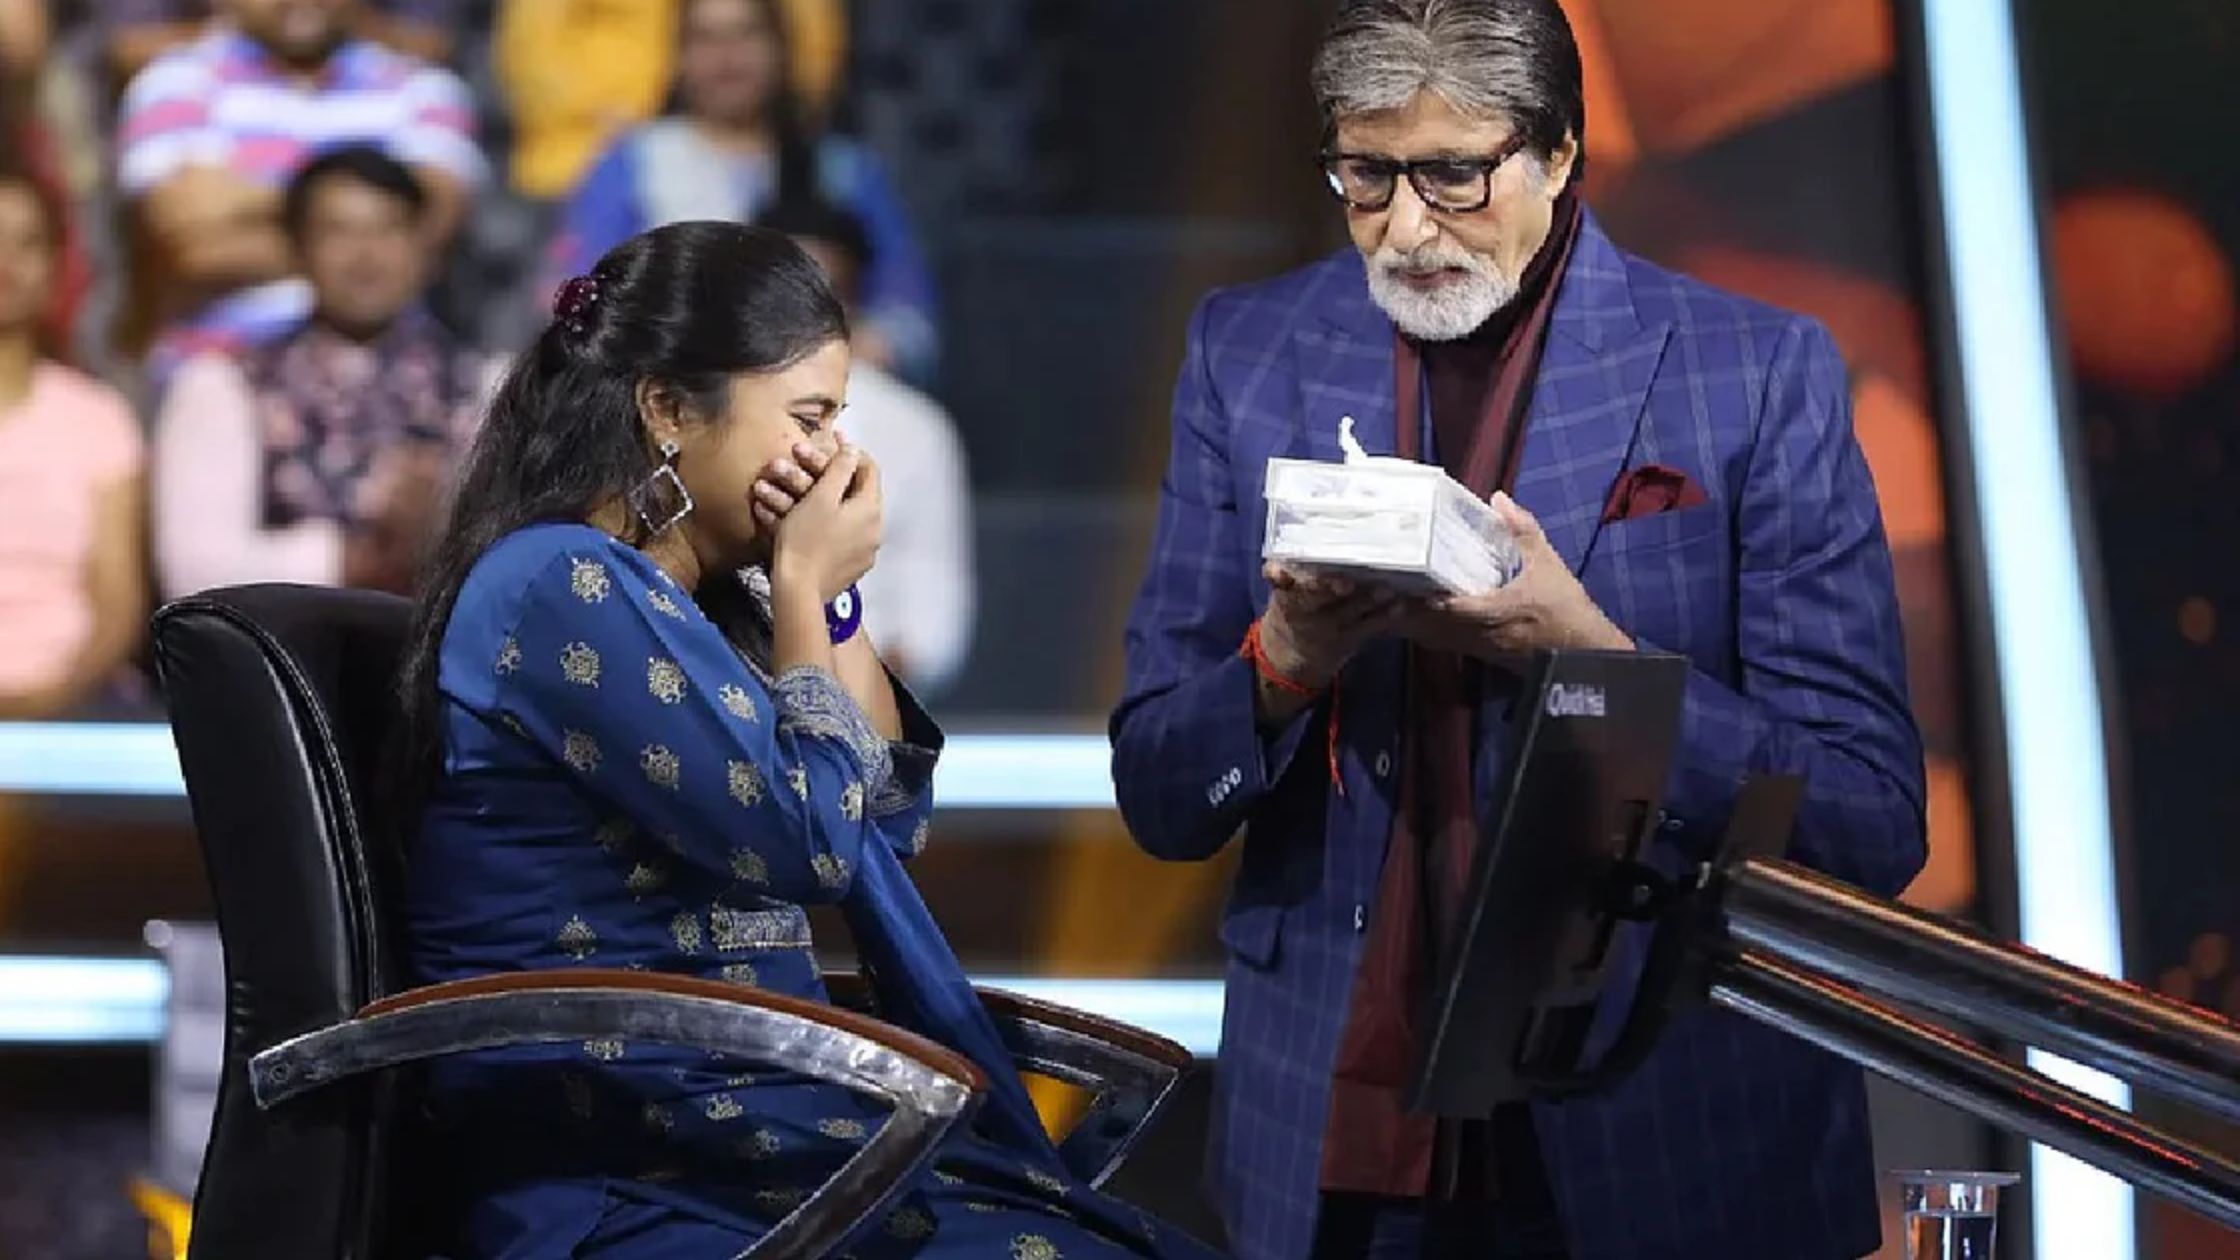 Mona of Bihar returned with 10 thousand from KBC